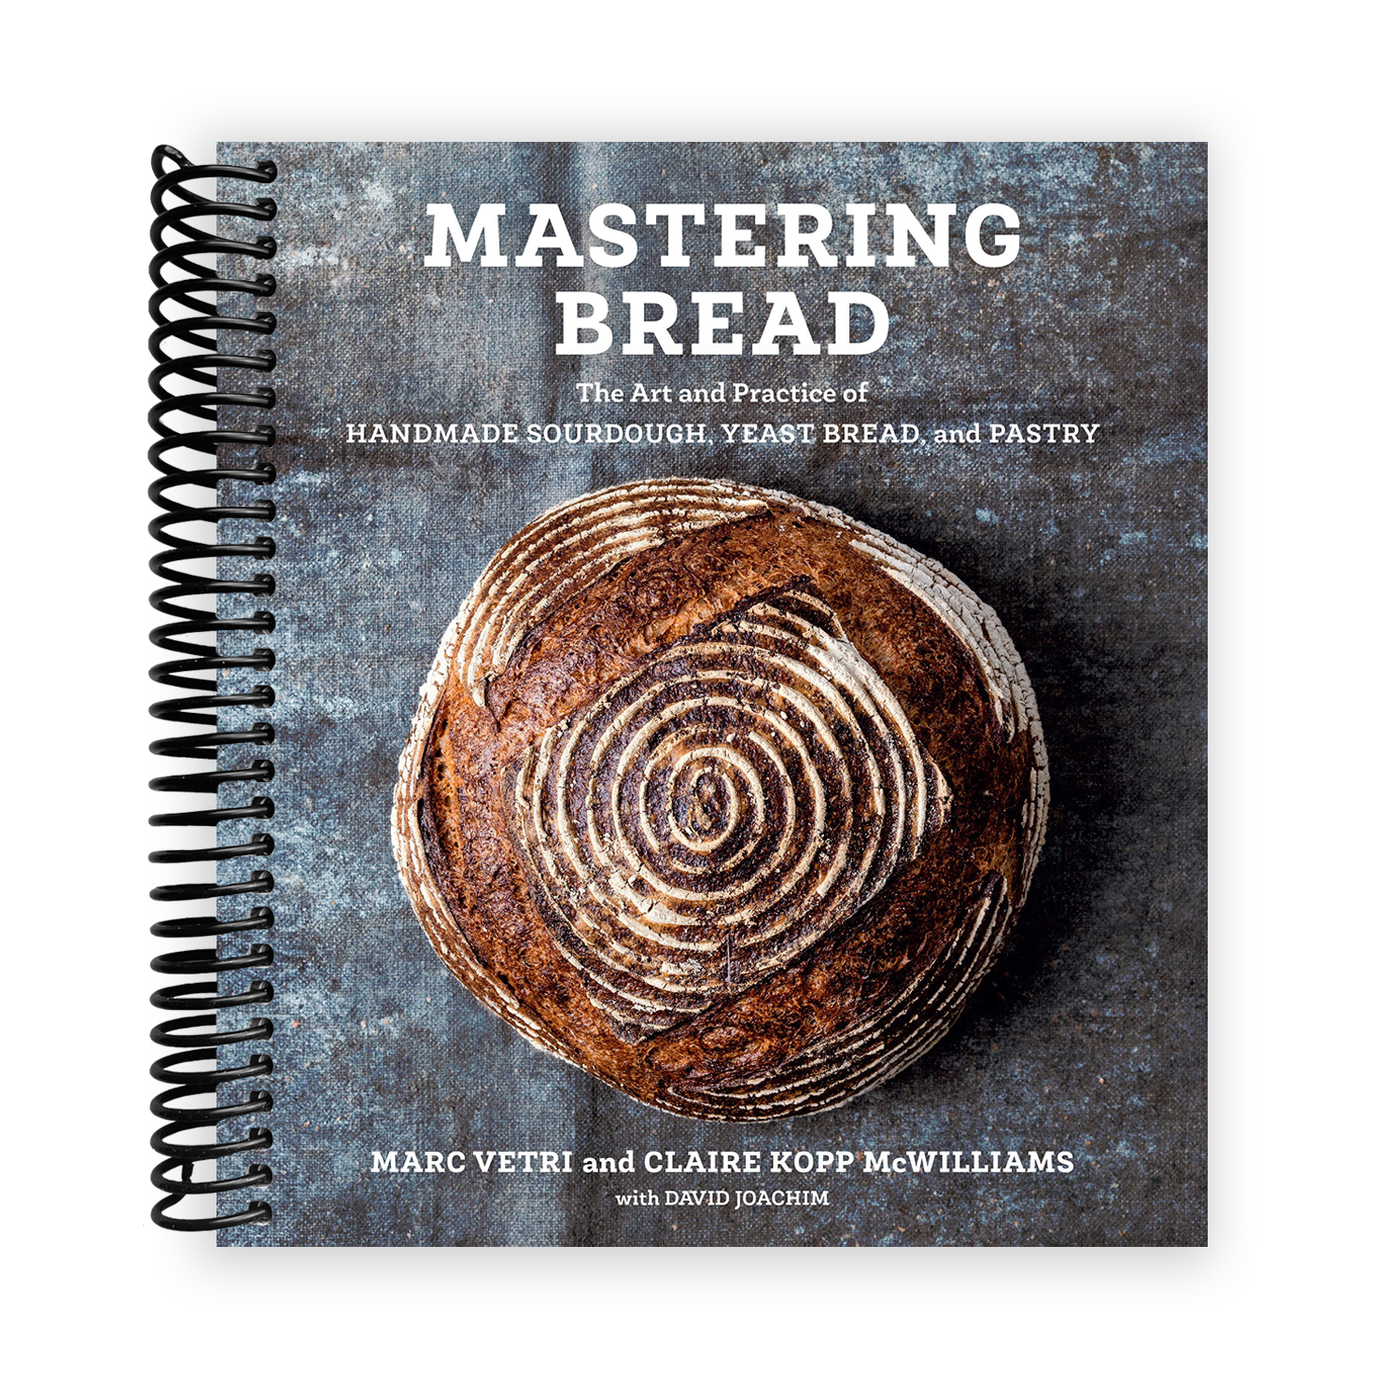 Mastering Bread: The Art and Practice of Handmade Sourdough, Yeast Bread, and Pastry (Spiral Bound)